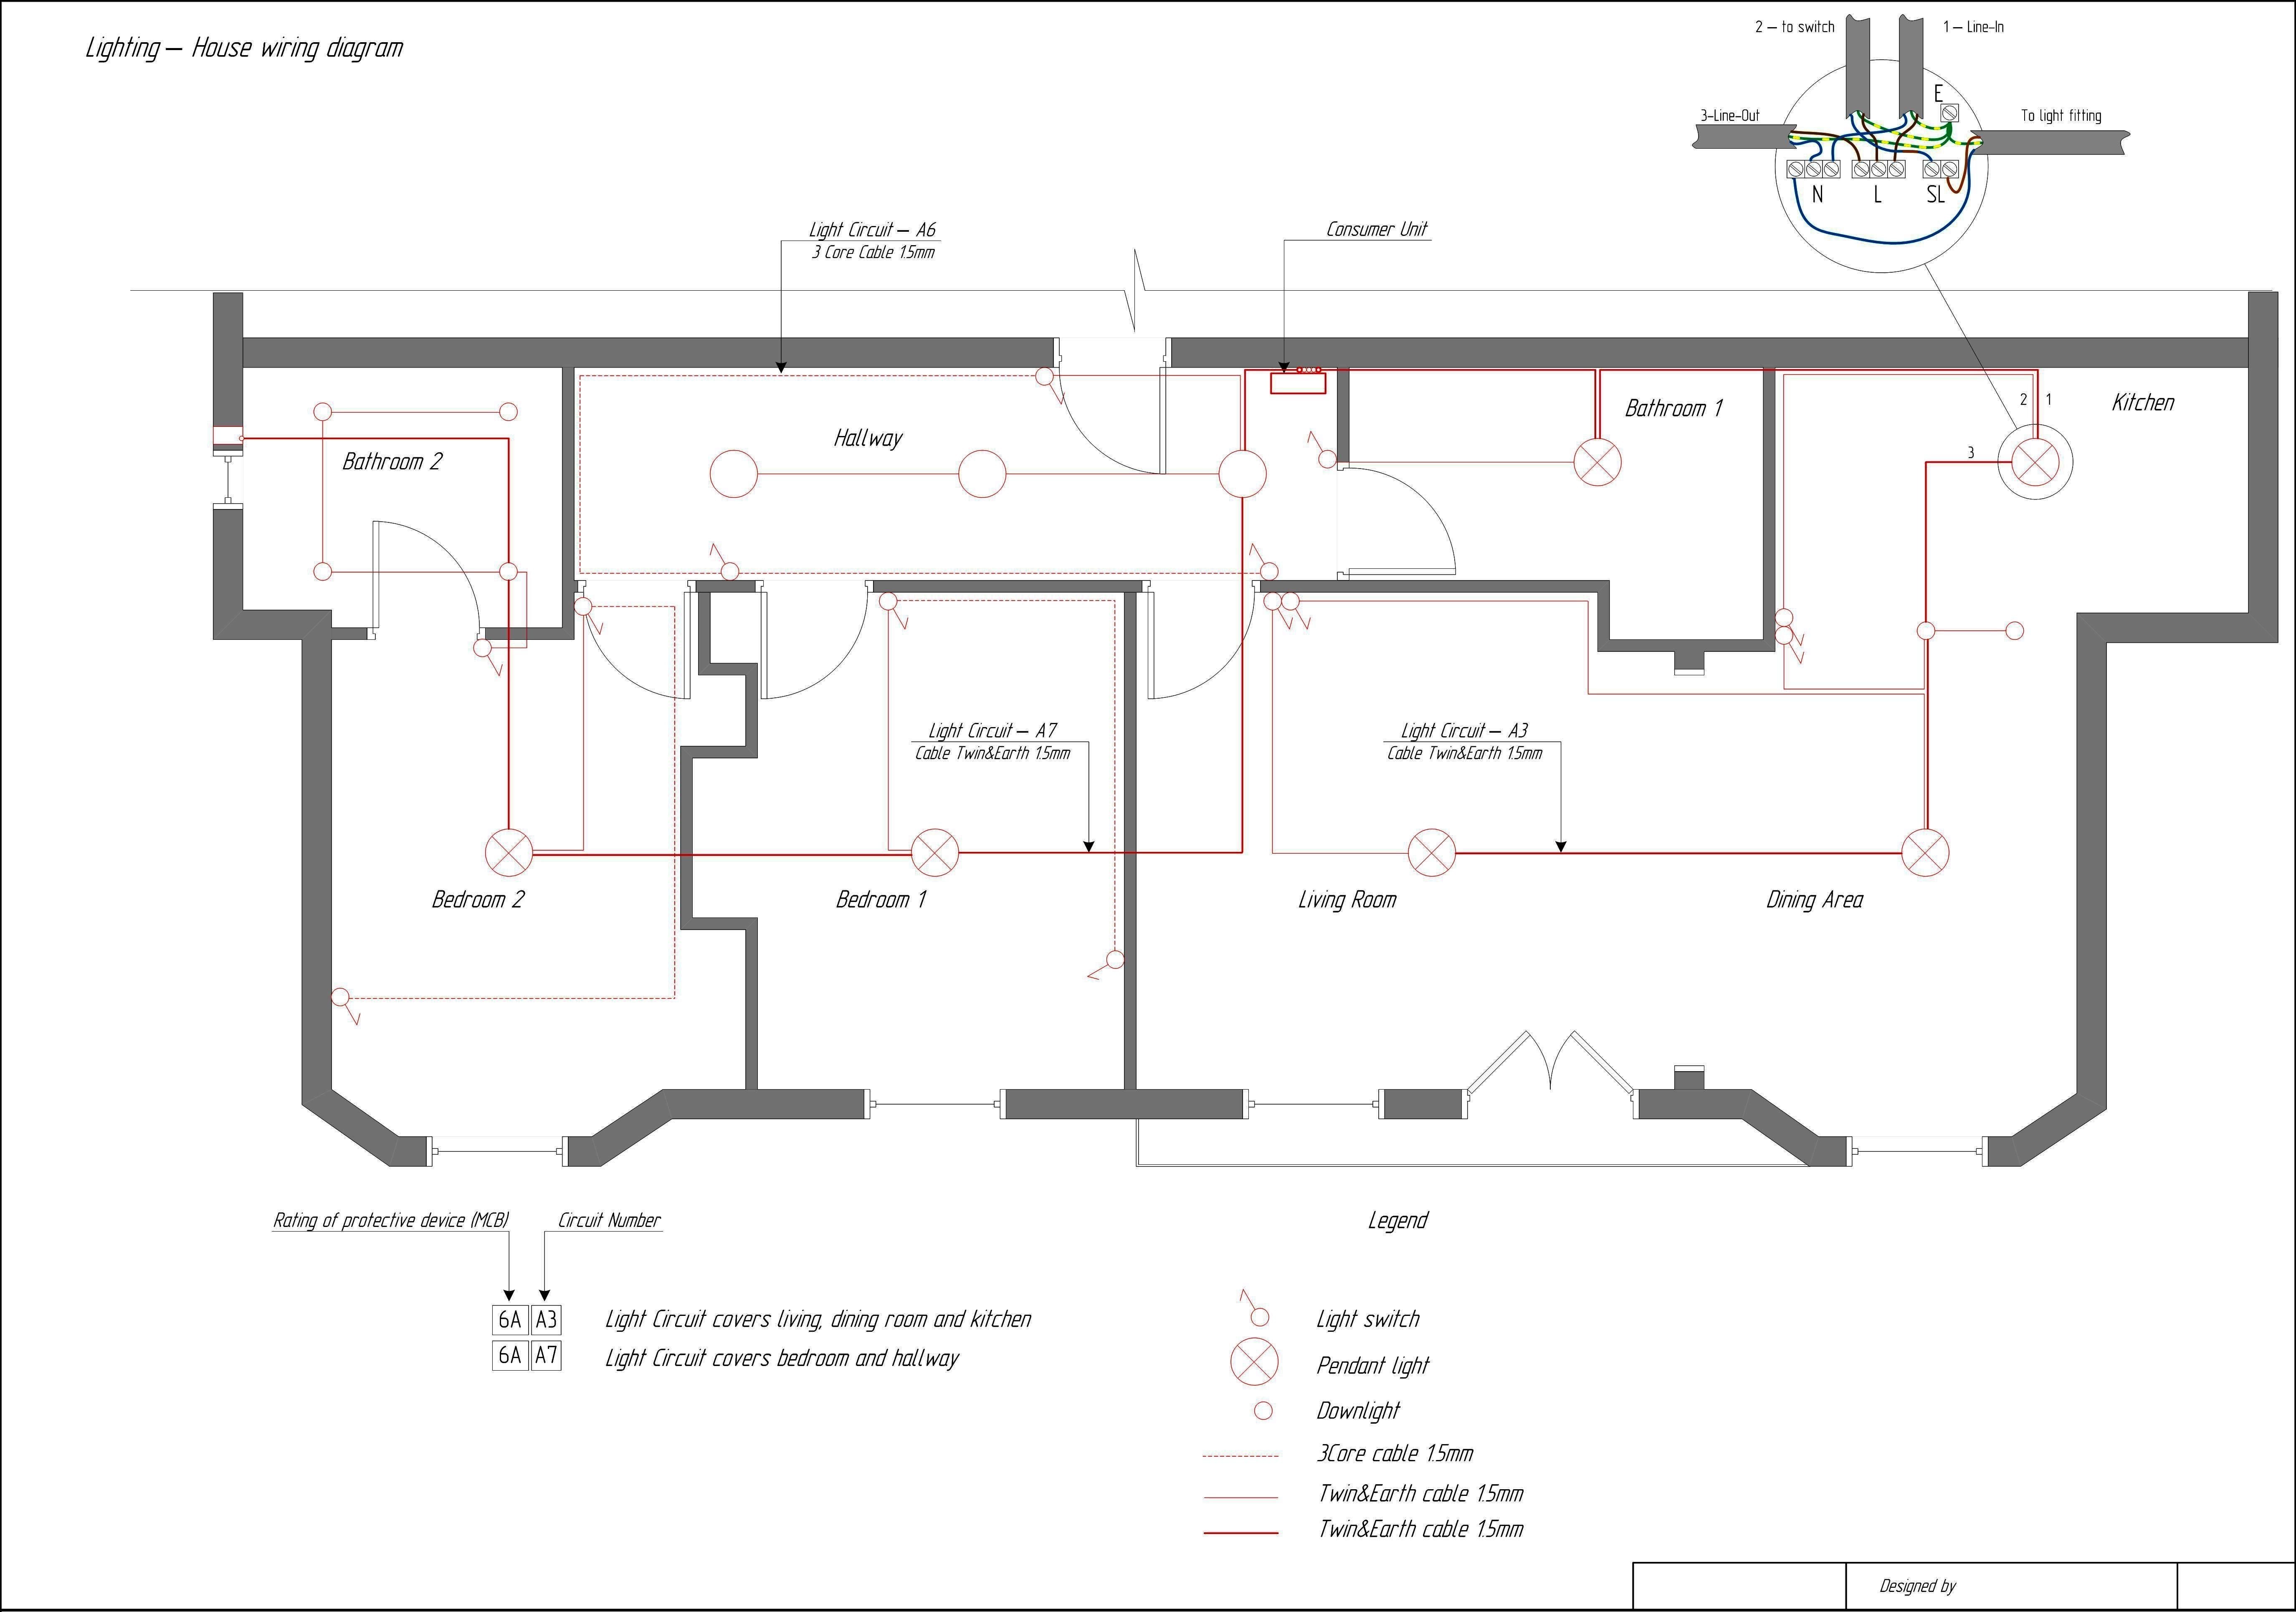 Wiring Diagram Apps New House Wiring Diagram Electrical Floor Plan 2004 2010 Bmw X3 E83 3